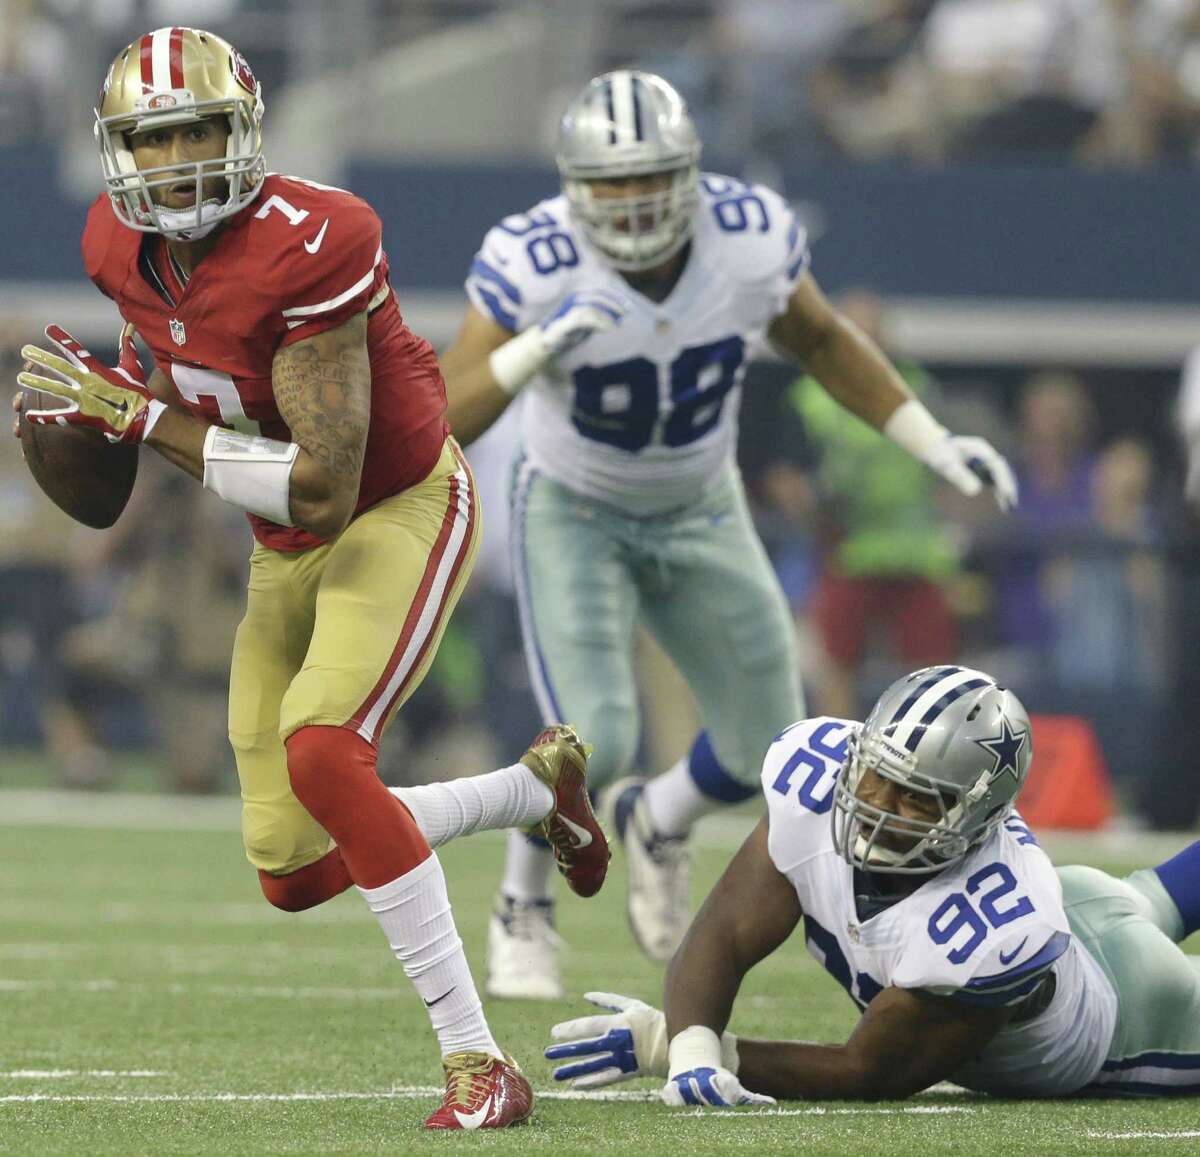 San Francisco 49ers quarterback Colin Kaepernick eludes the Dallas Cowboy defense in the season opener last week. After one bad showing, some fans are expecting the worst this year.